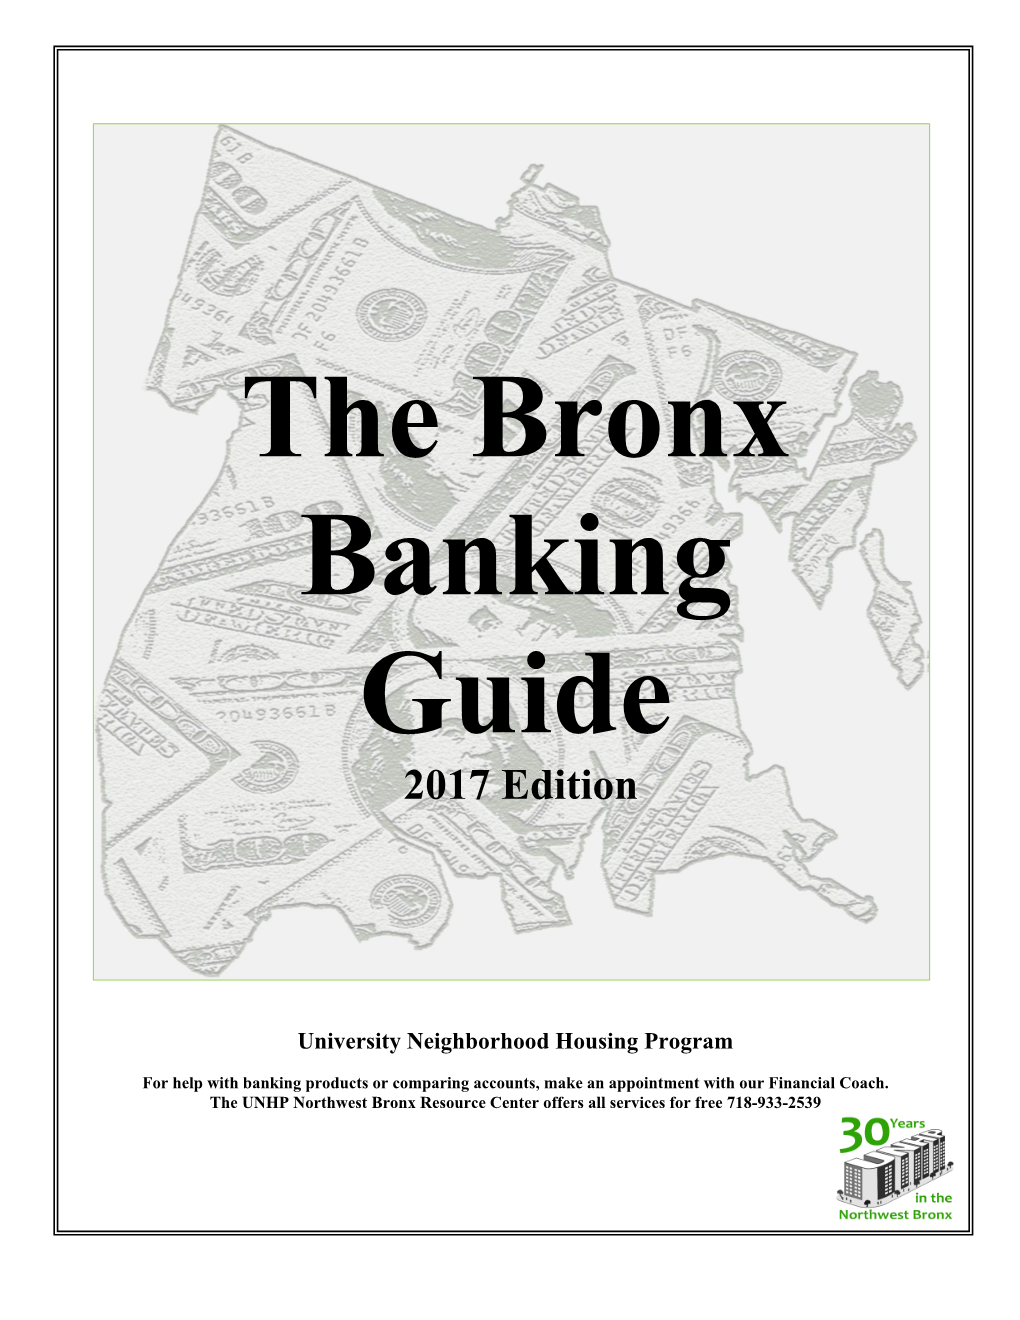 Guide to Banking in the Bronx